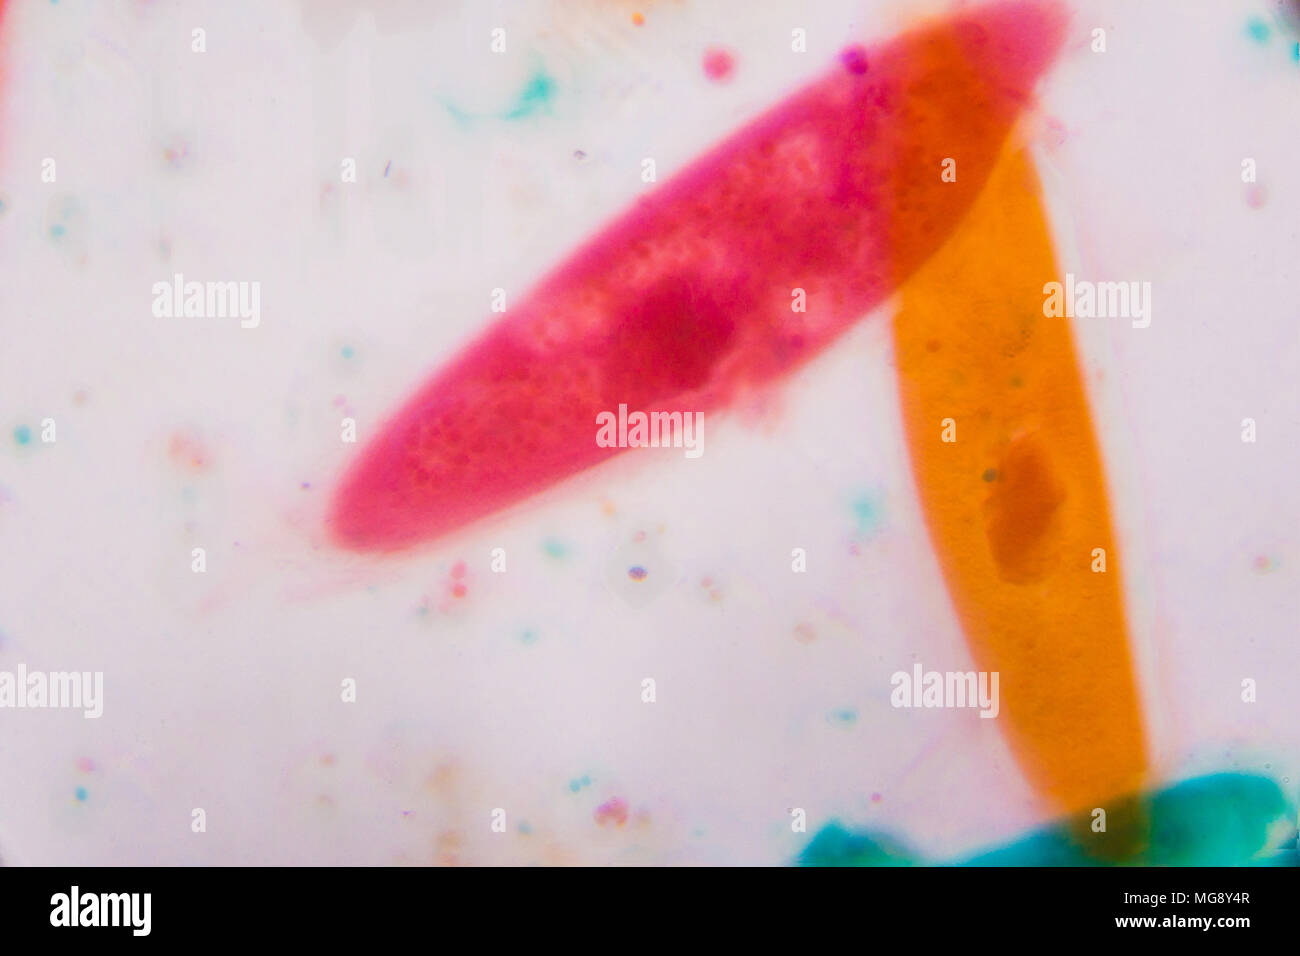 Paramecium caudatum under the microscope - Abstract shapes in color of green, red, orange and brown on white background. Stock Photo